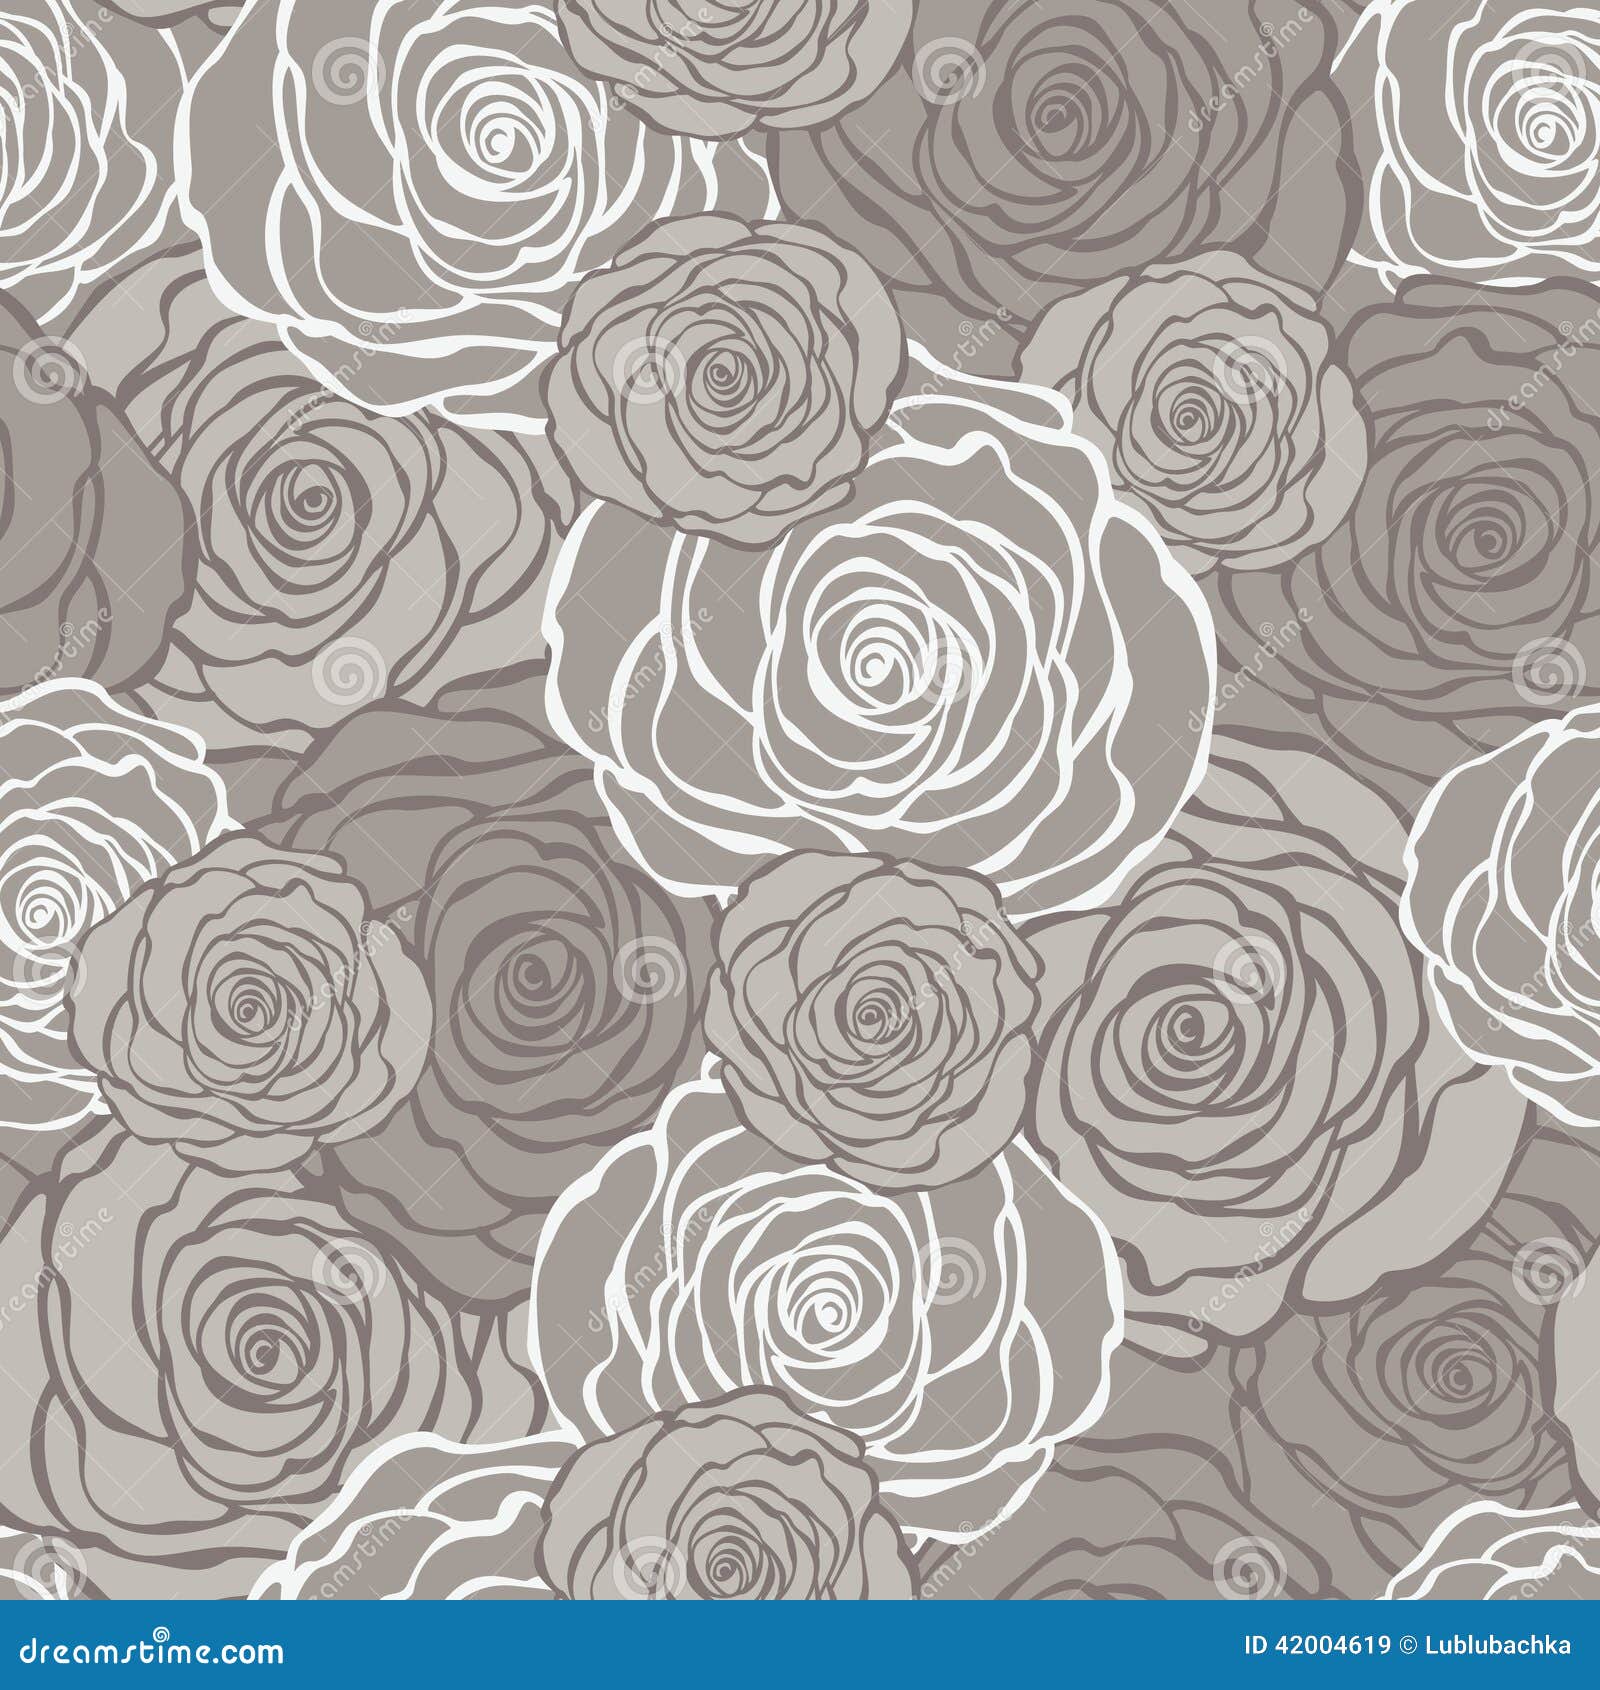 art deco floral seamless pattern with roses.